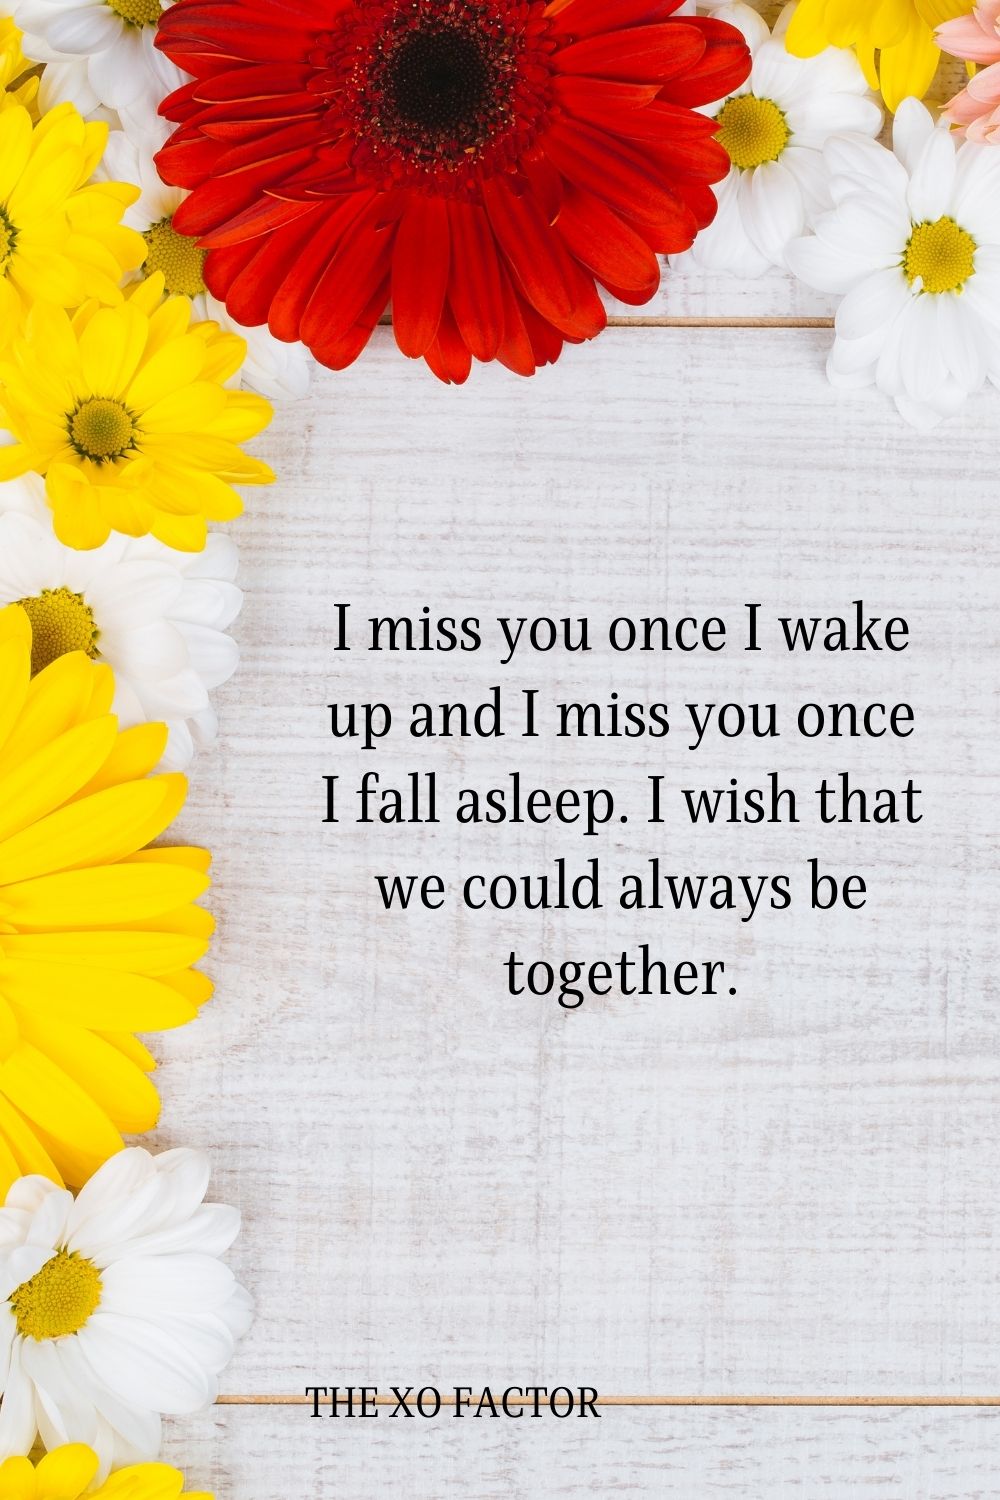 I miss you once I wake up and I miss you once I fall asleep. I wish that we could always be together.